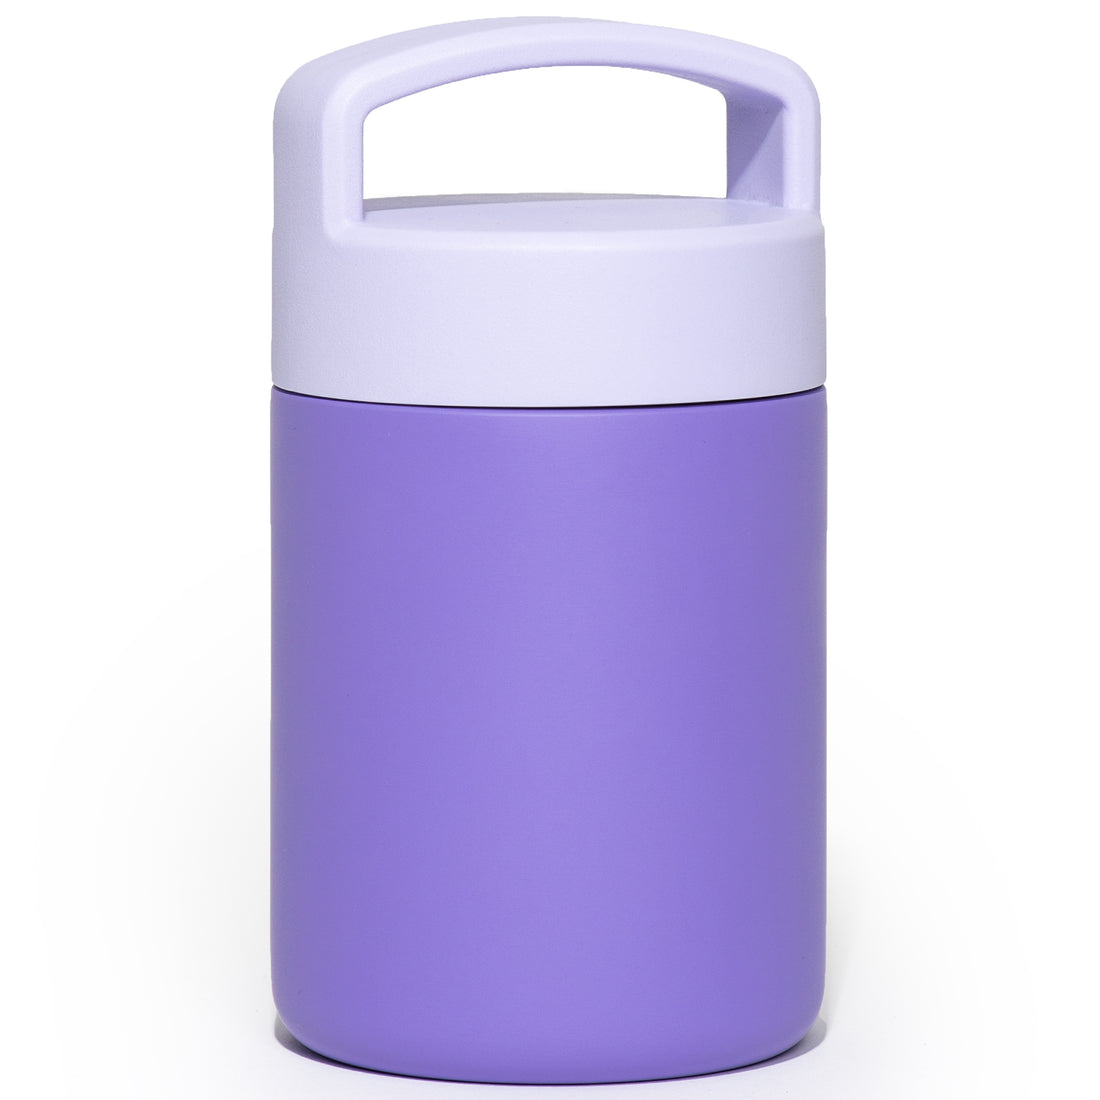 Back to School, Thermos Kids